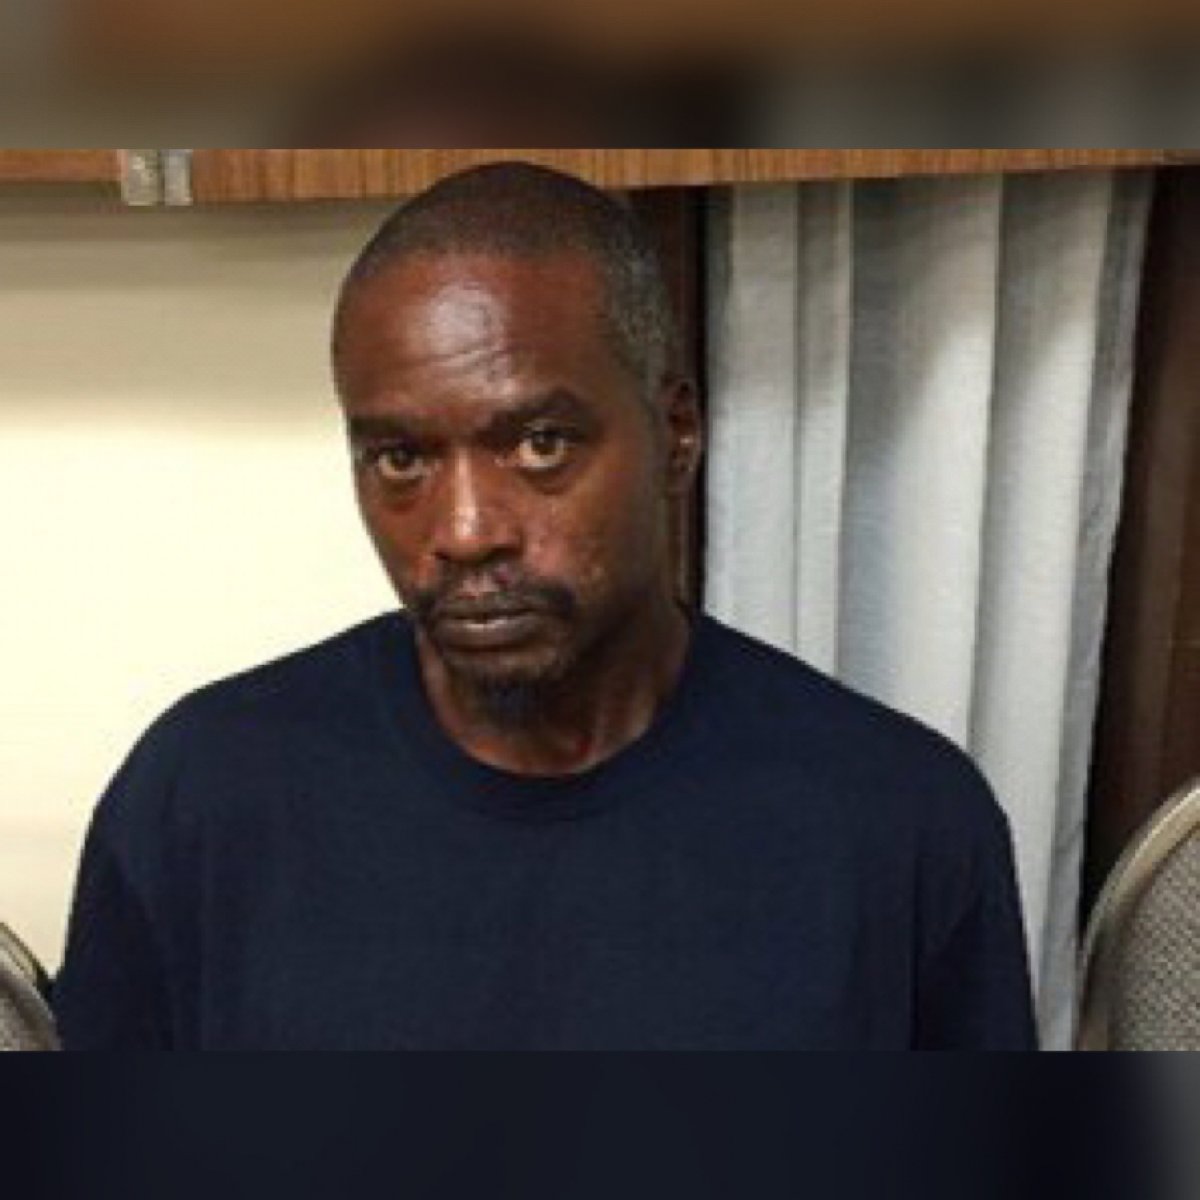 PHOTO: Rodney Earl Sanders was charged on August 26, 2016, with two counts of capital murder in connection with the killing of two nuns in Mississippi.